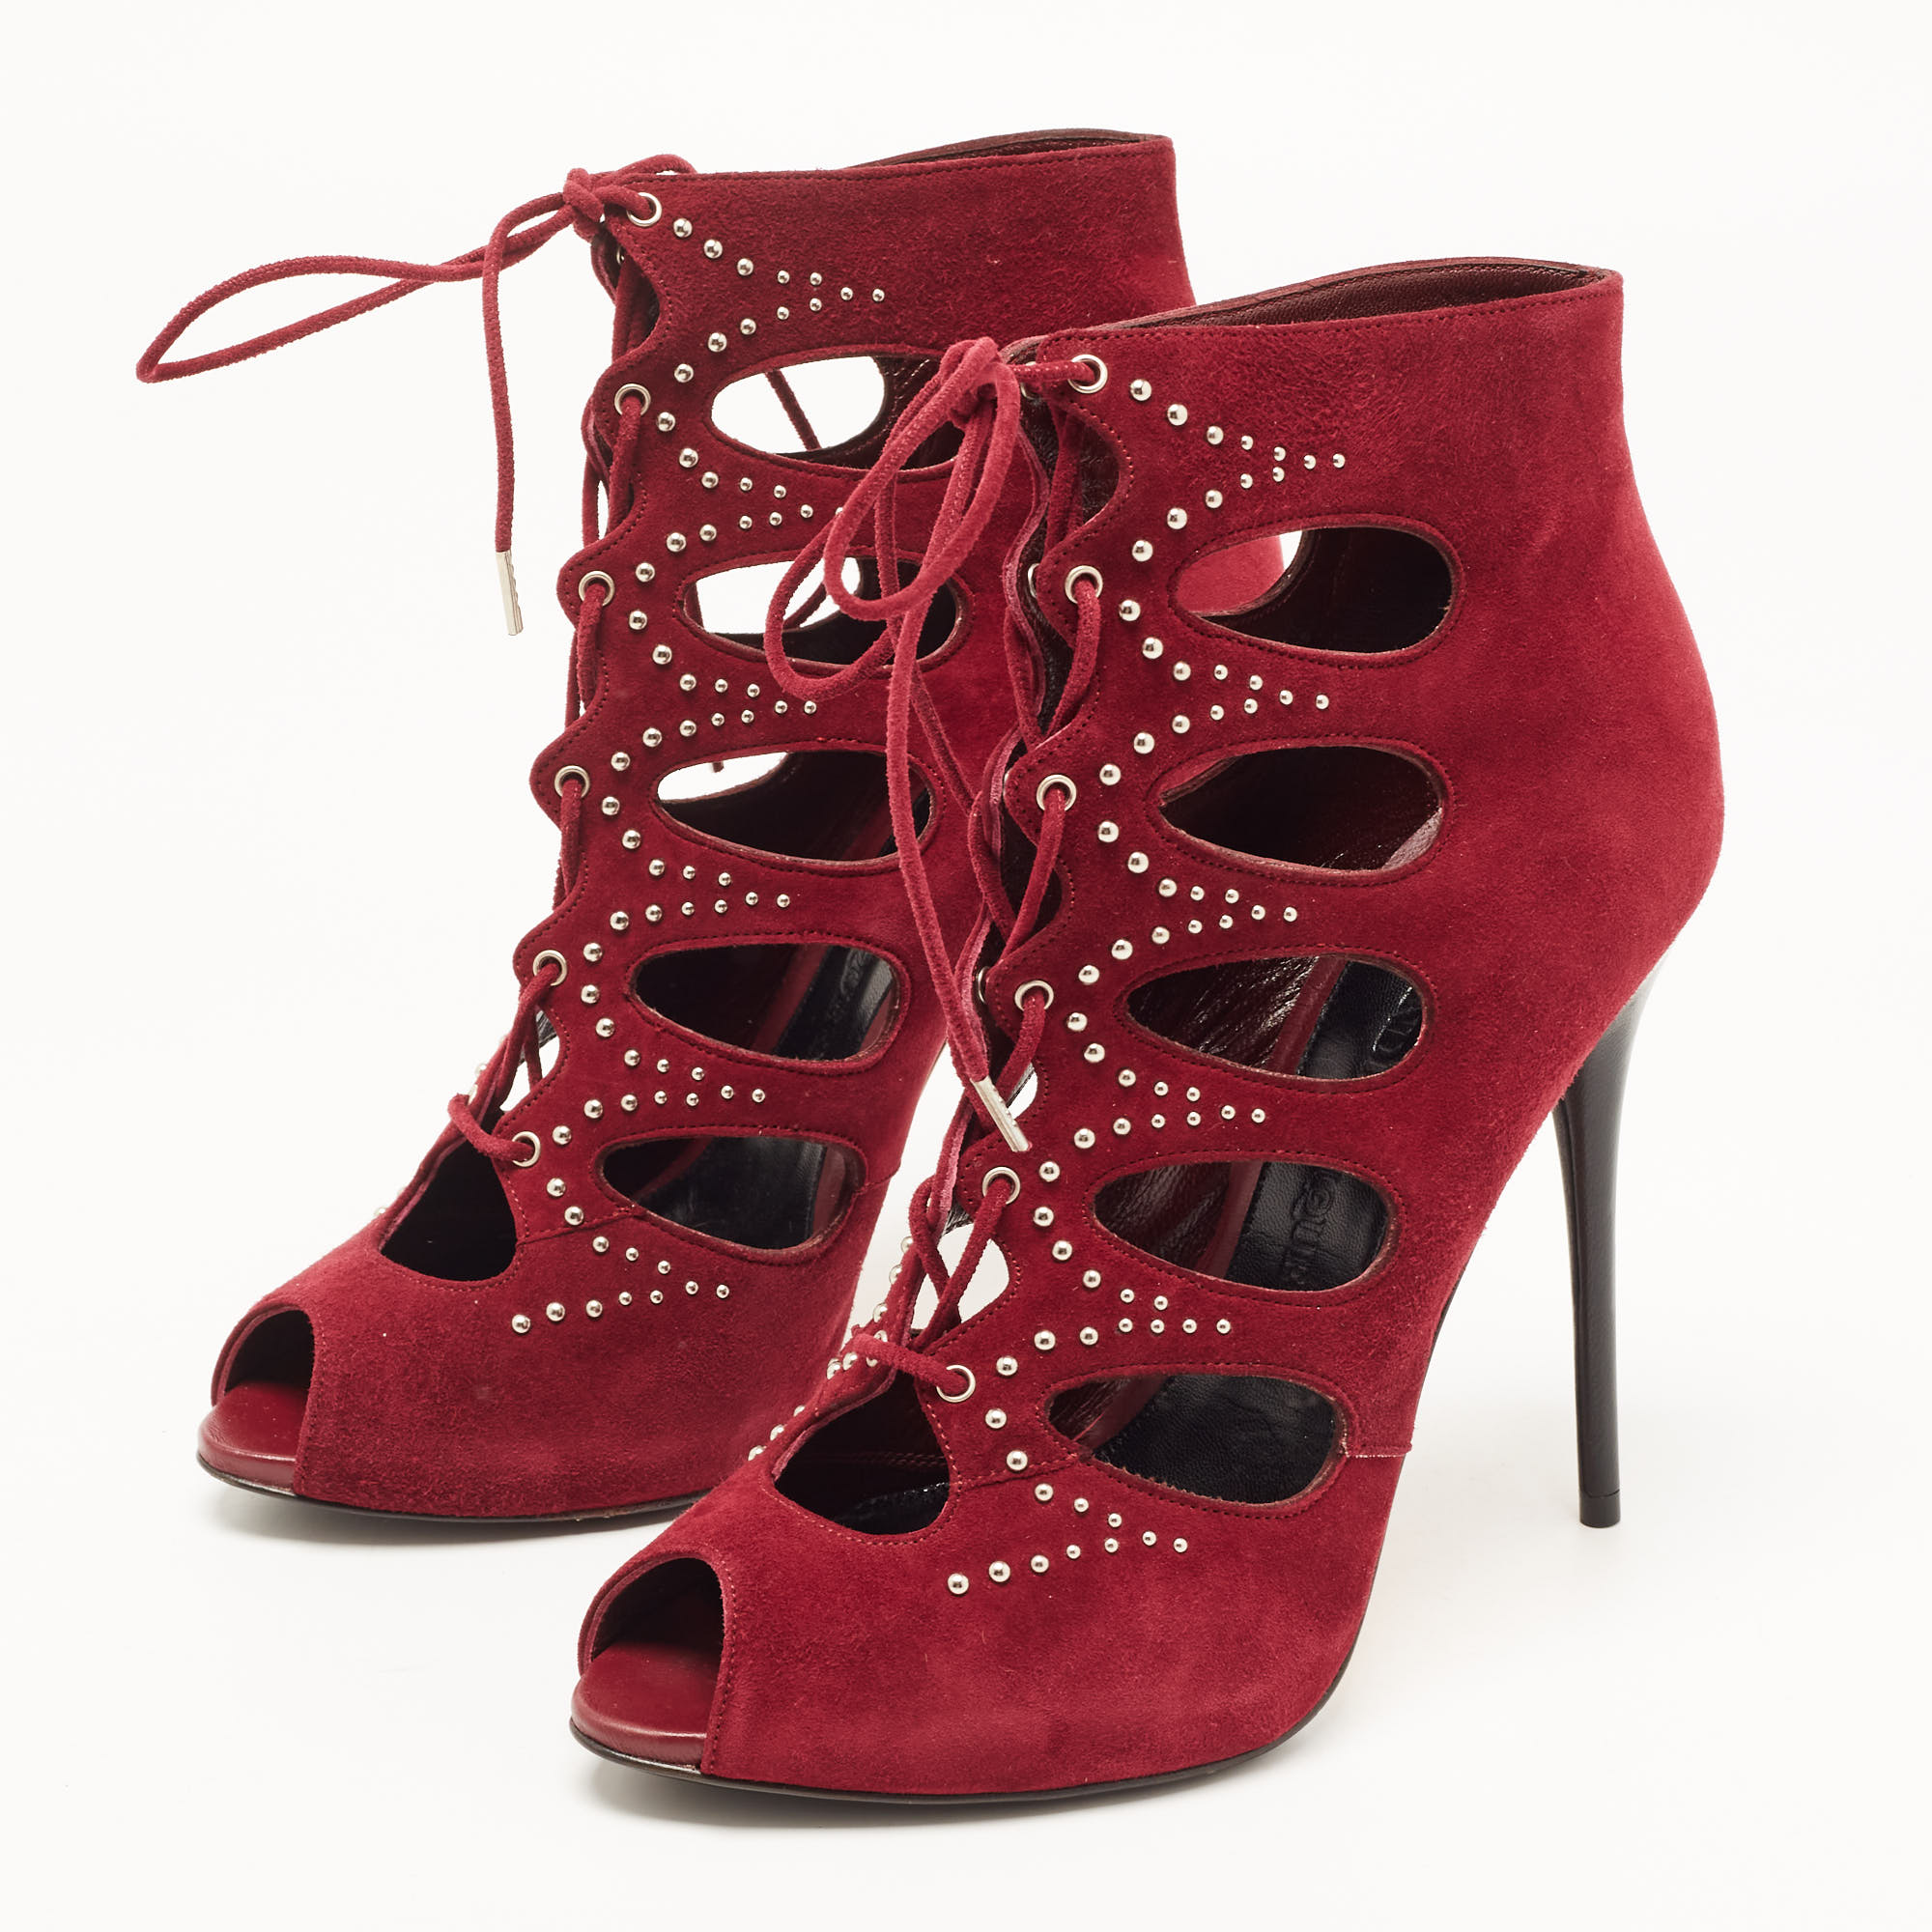 

Alexander McQueen Burgundy Suede Cut Out Embellished Lace Up Ankle Booties Size